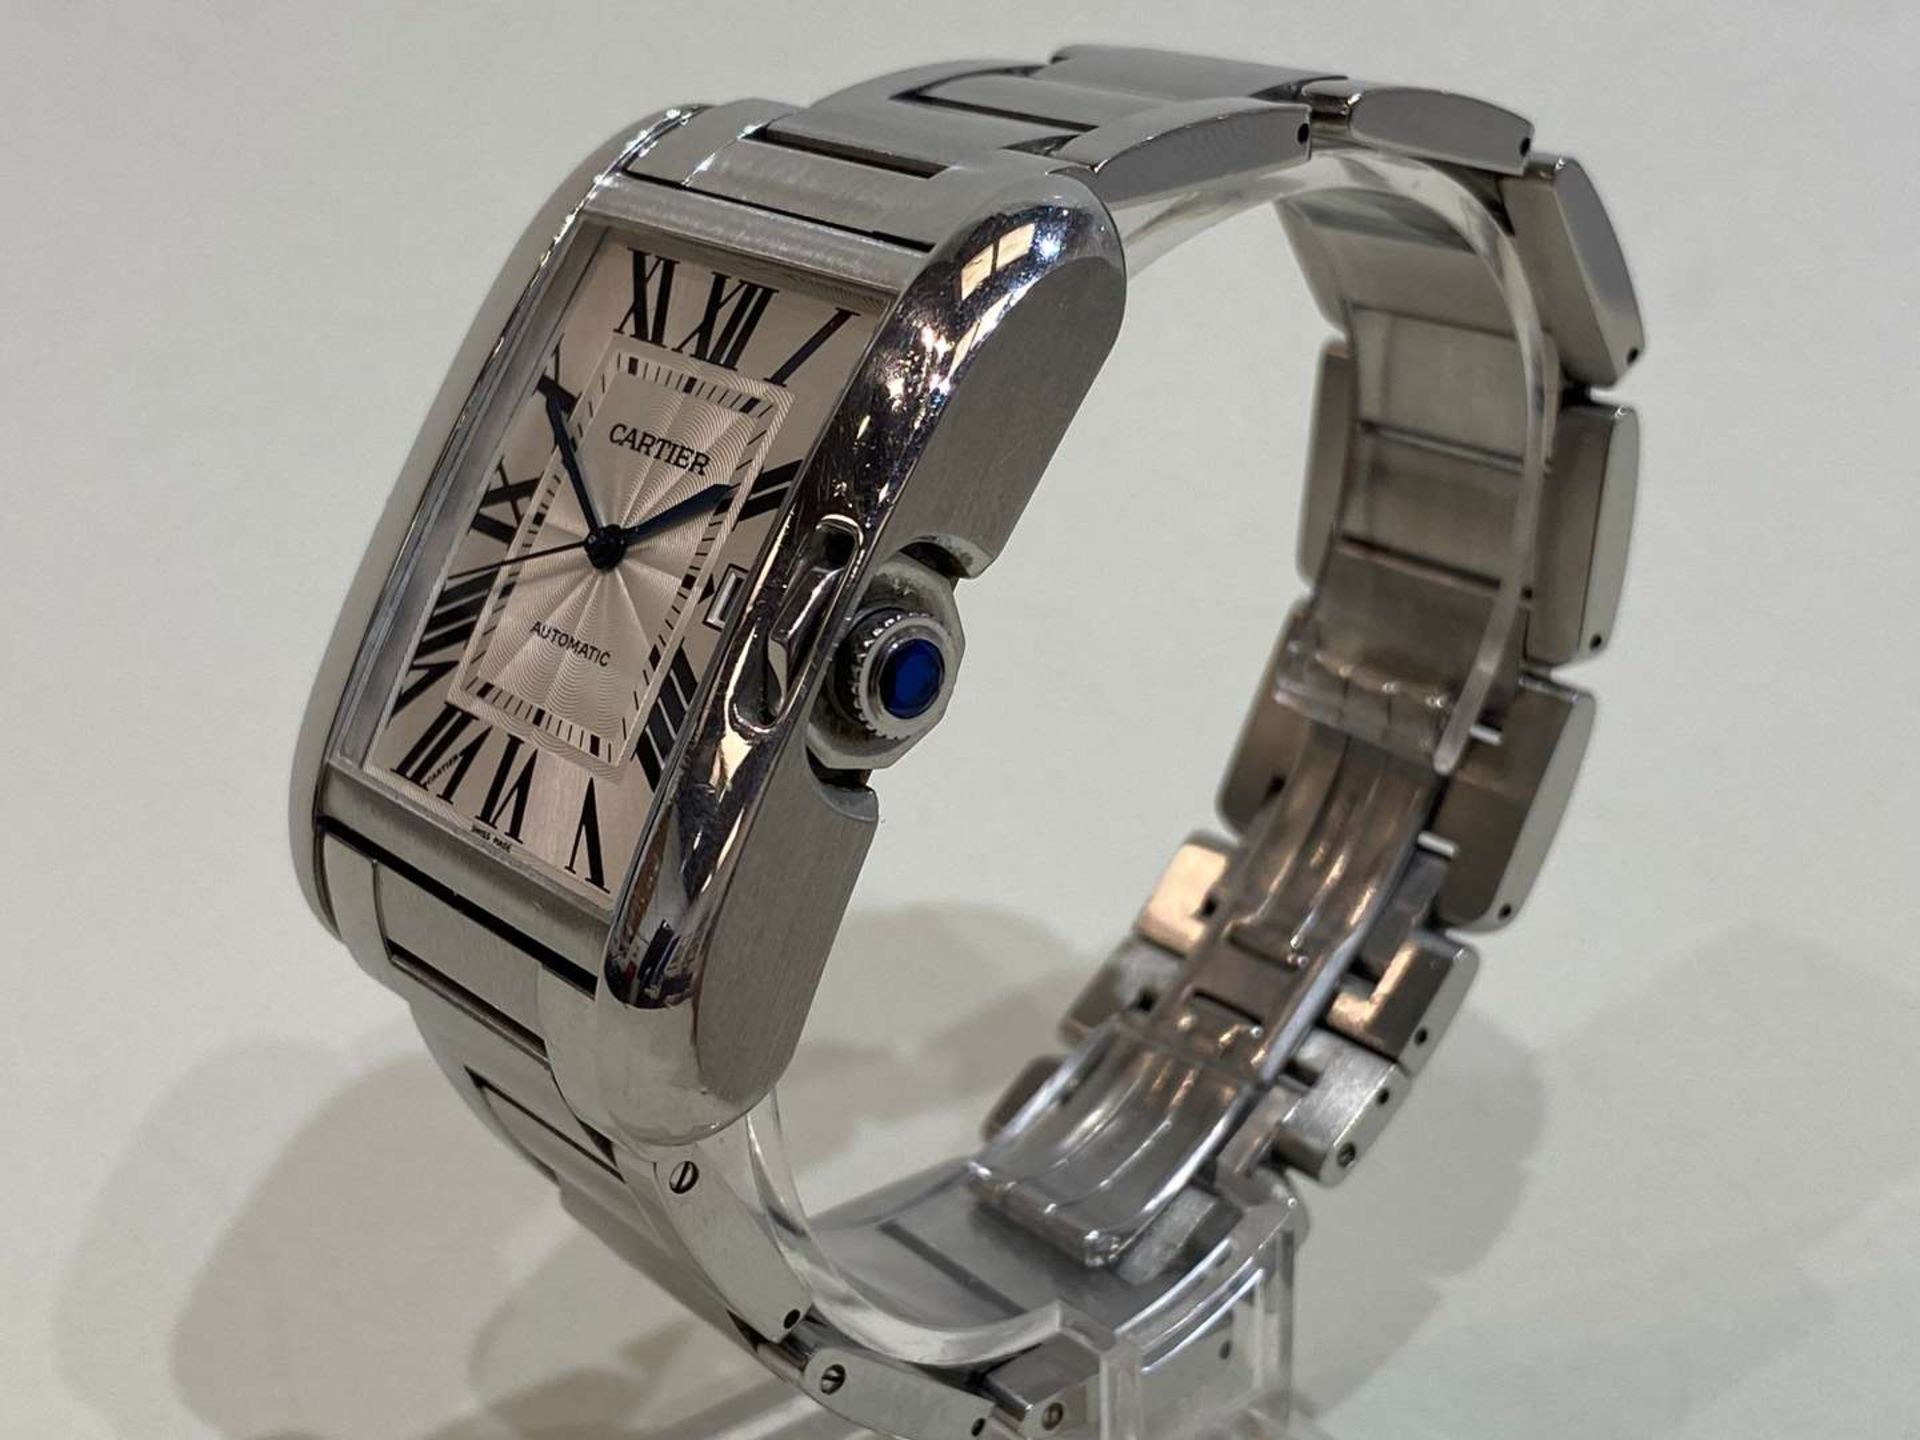 CARTIER, TANK ANGLAISE, XL, a 2014, stainless steel, automatic, centre seconds, calendar wristwatch. - Image 2 of 9